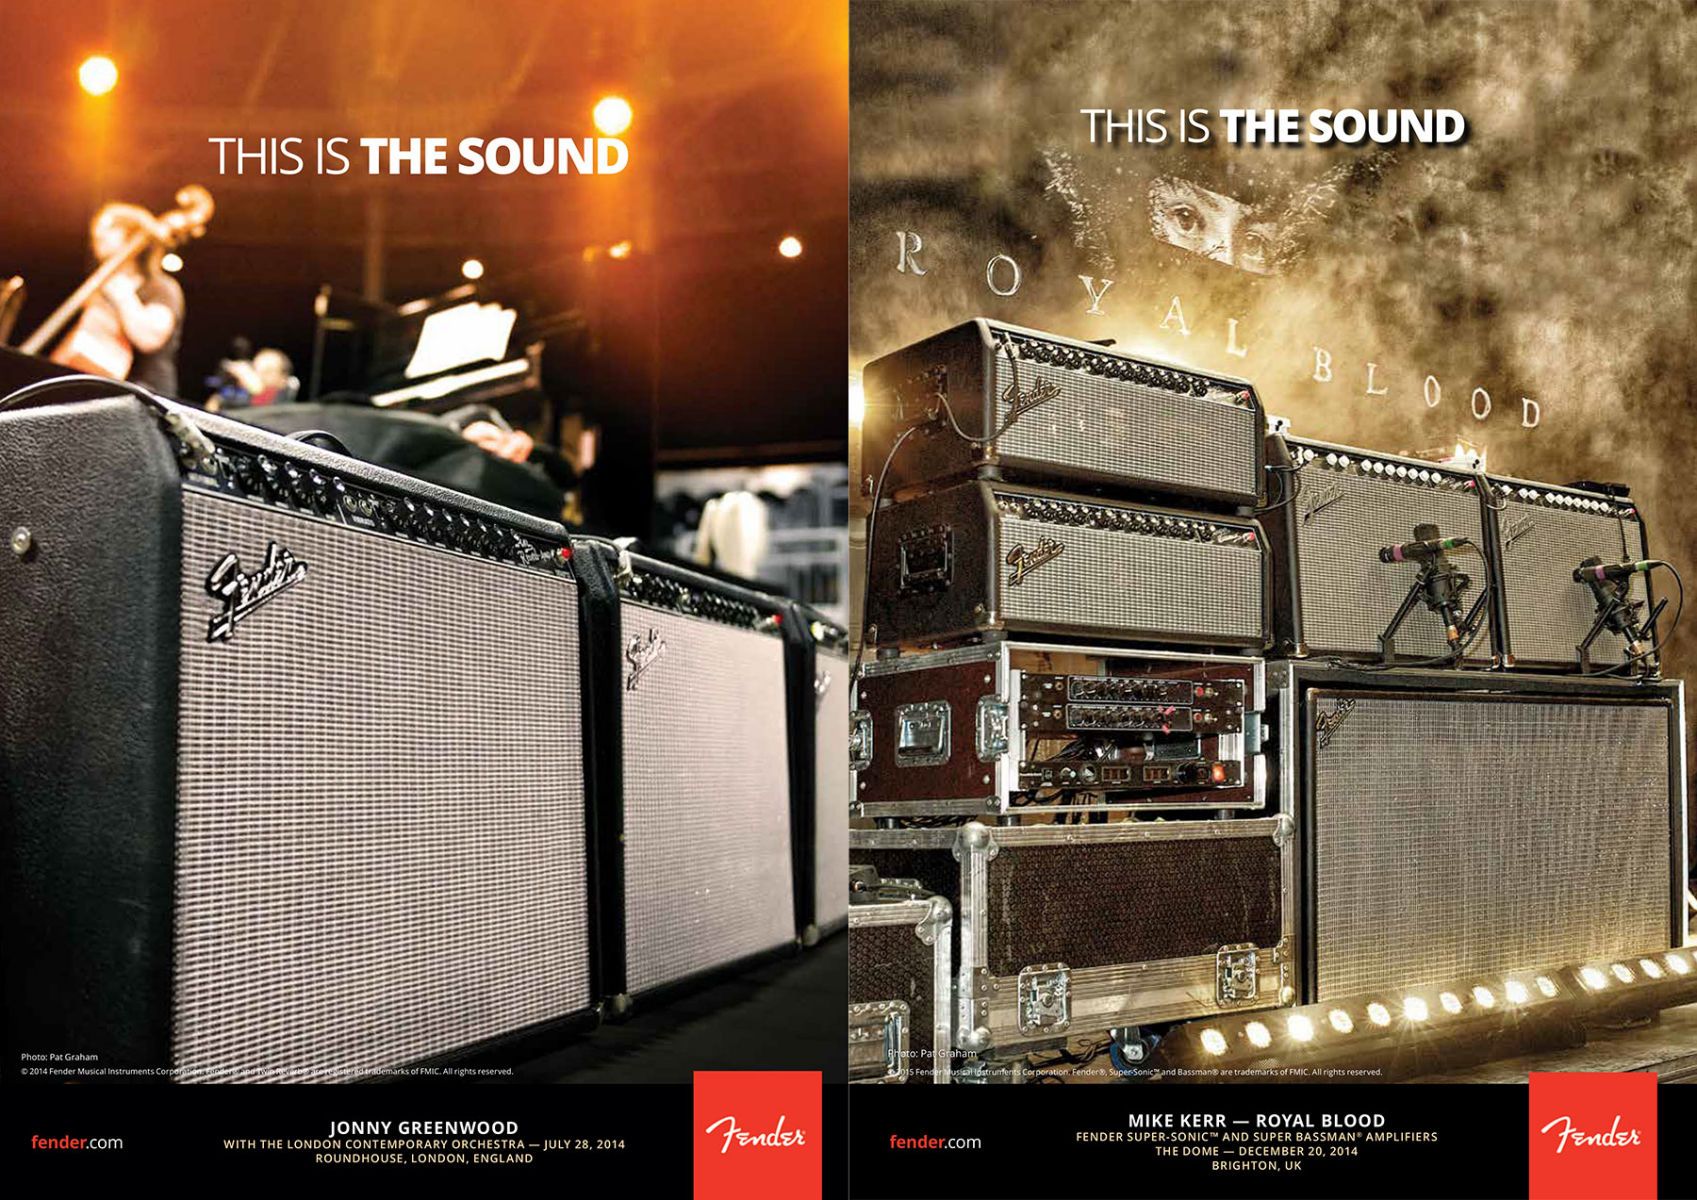 1r2014_fender_this_is_the_sound_ad_jonny_greenwood